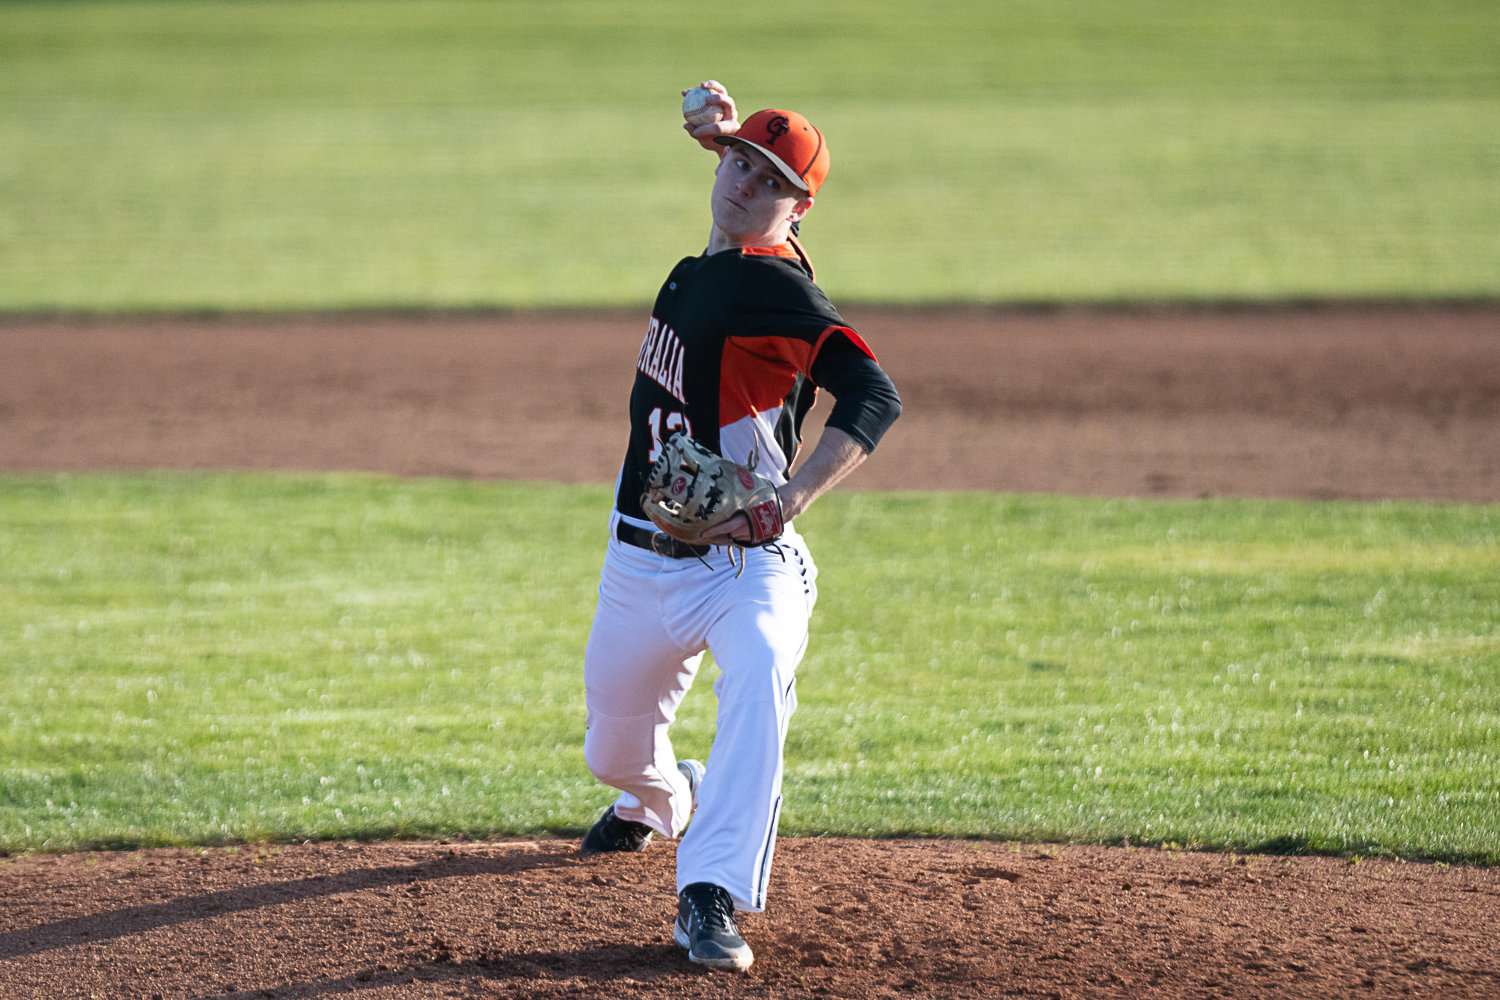 Brady Sprague throws a pitch during Centralia's 14-13 win over Aberdeen on March 21.